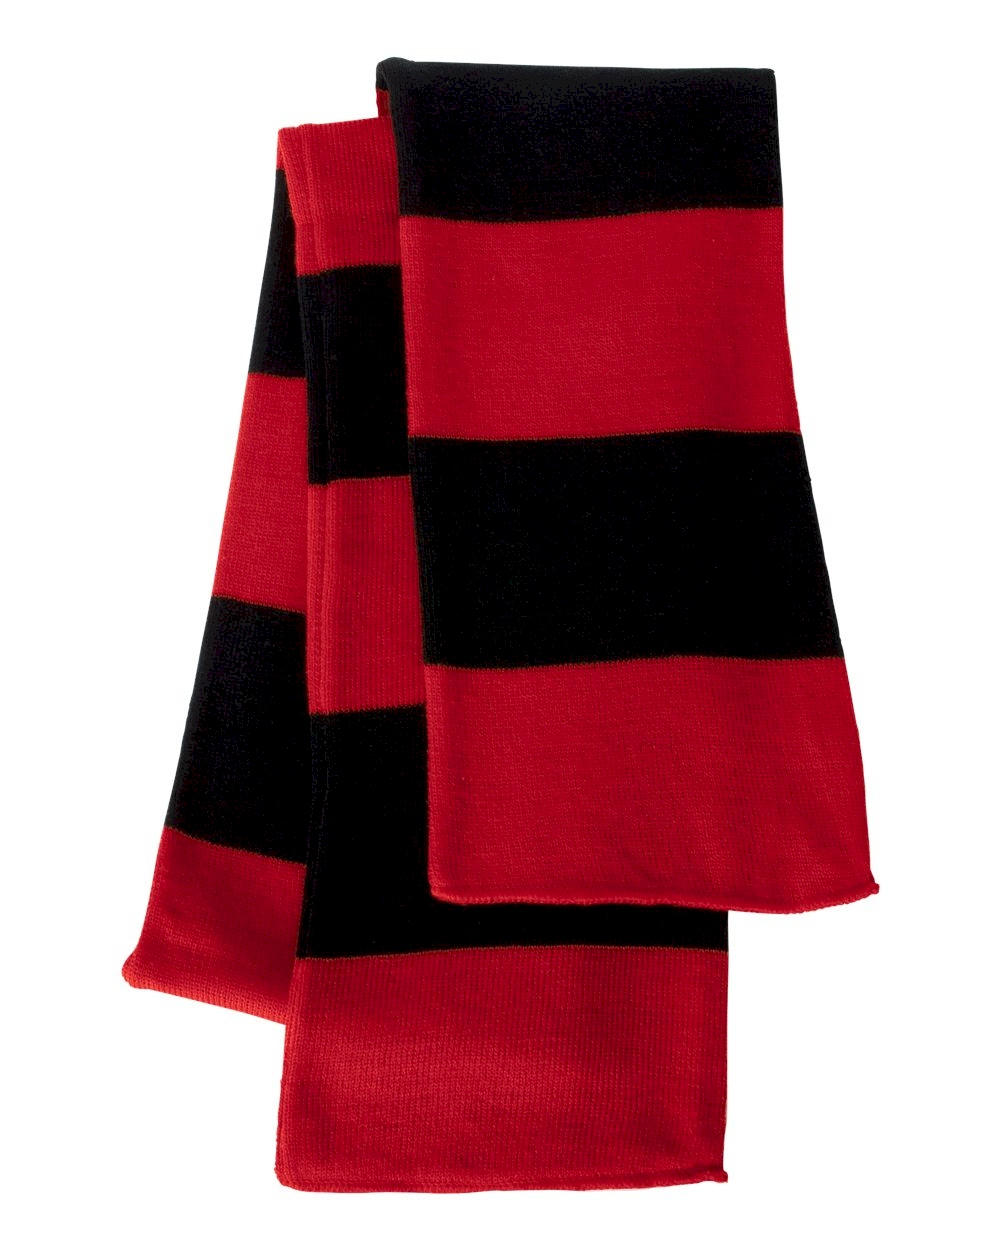 Rugby Striped Knit Scarf Embroidery Blanks - RED/BLACK